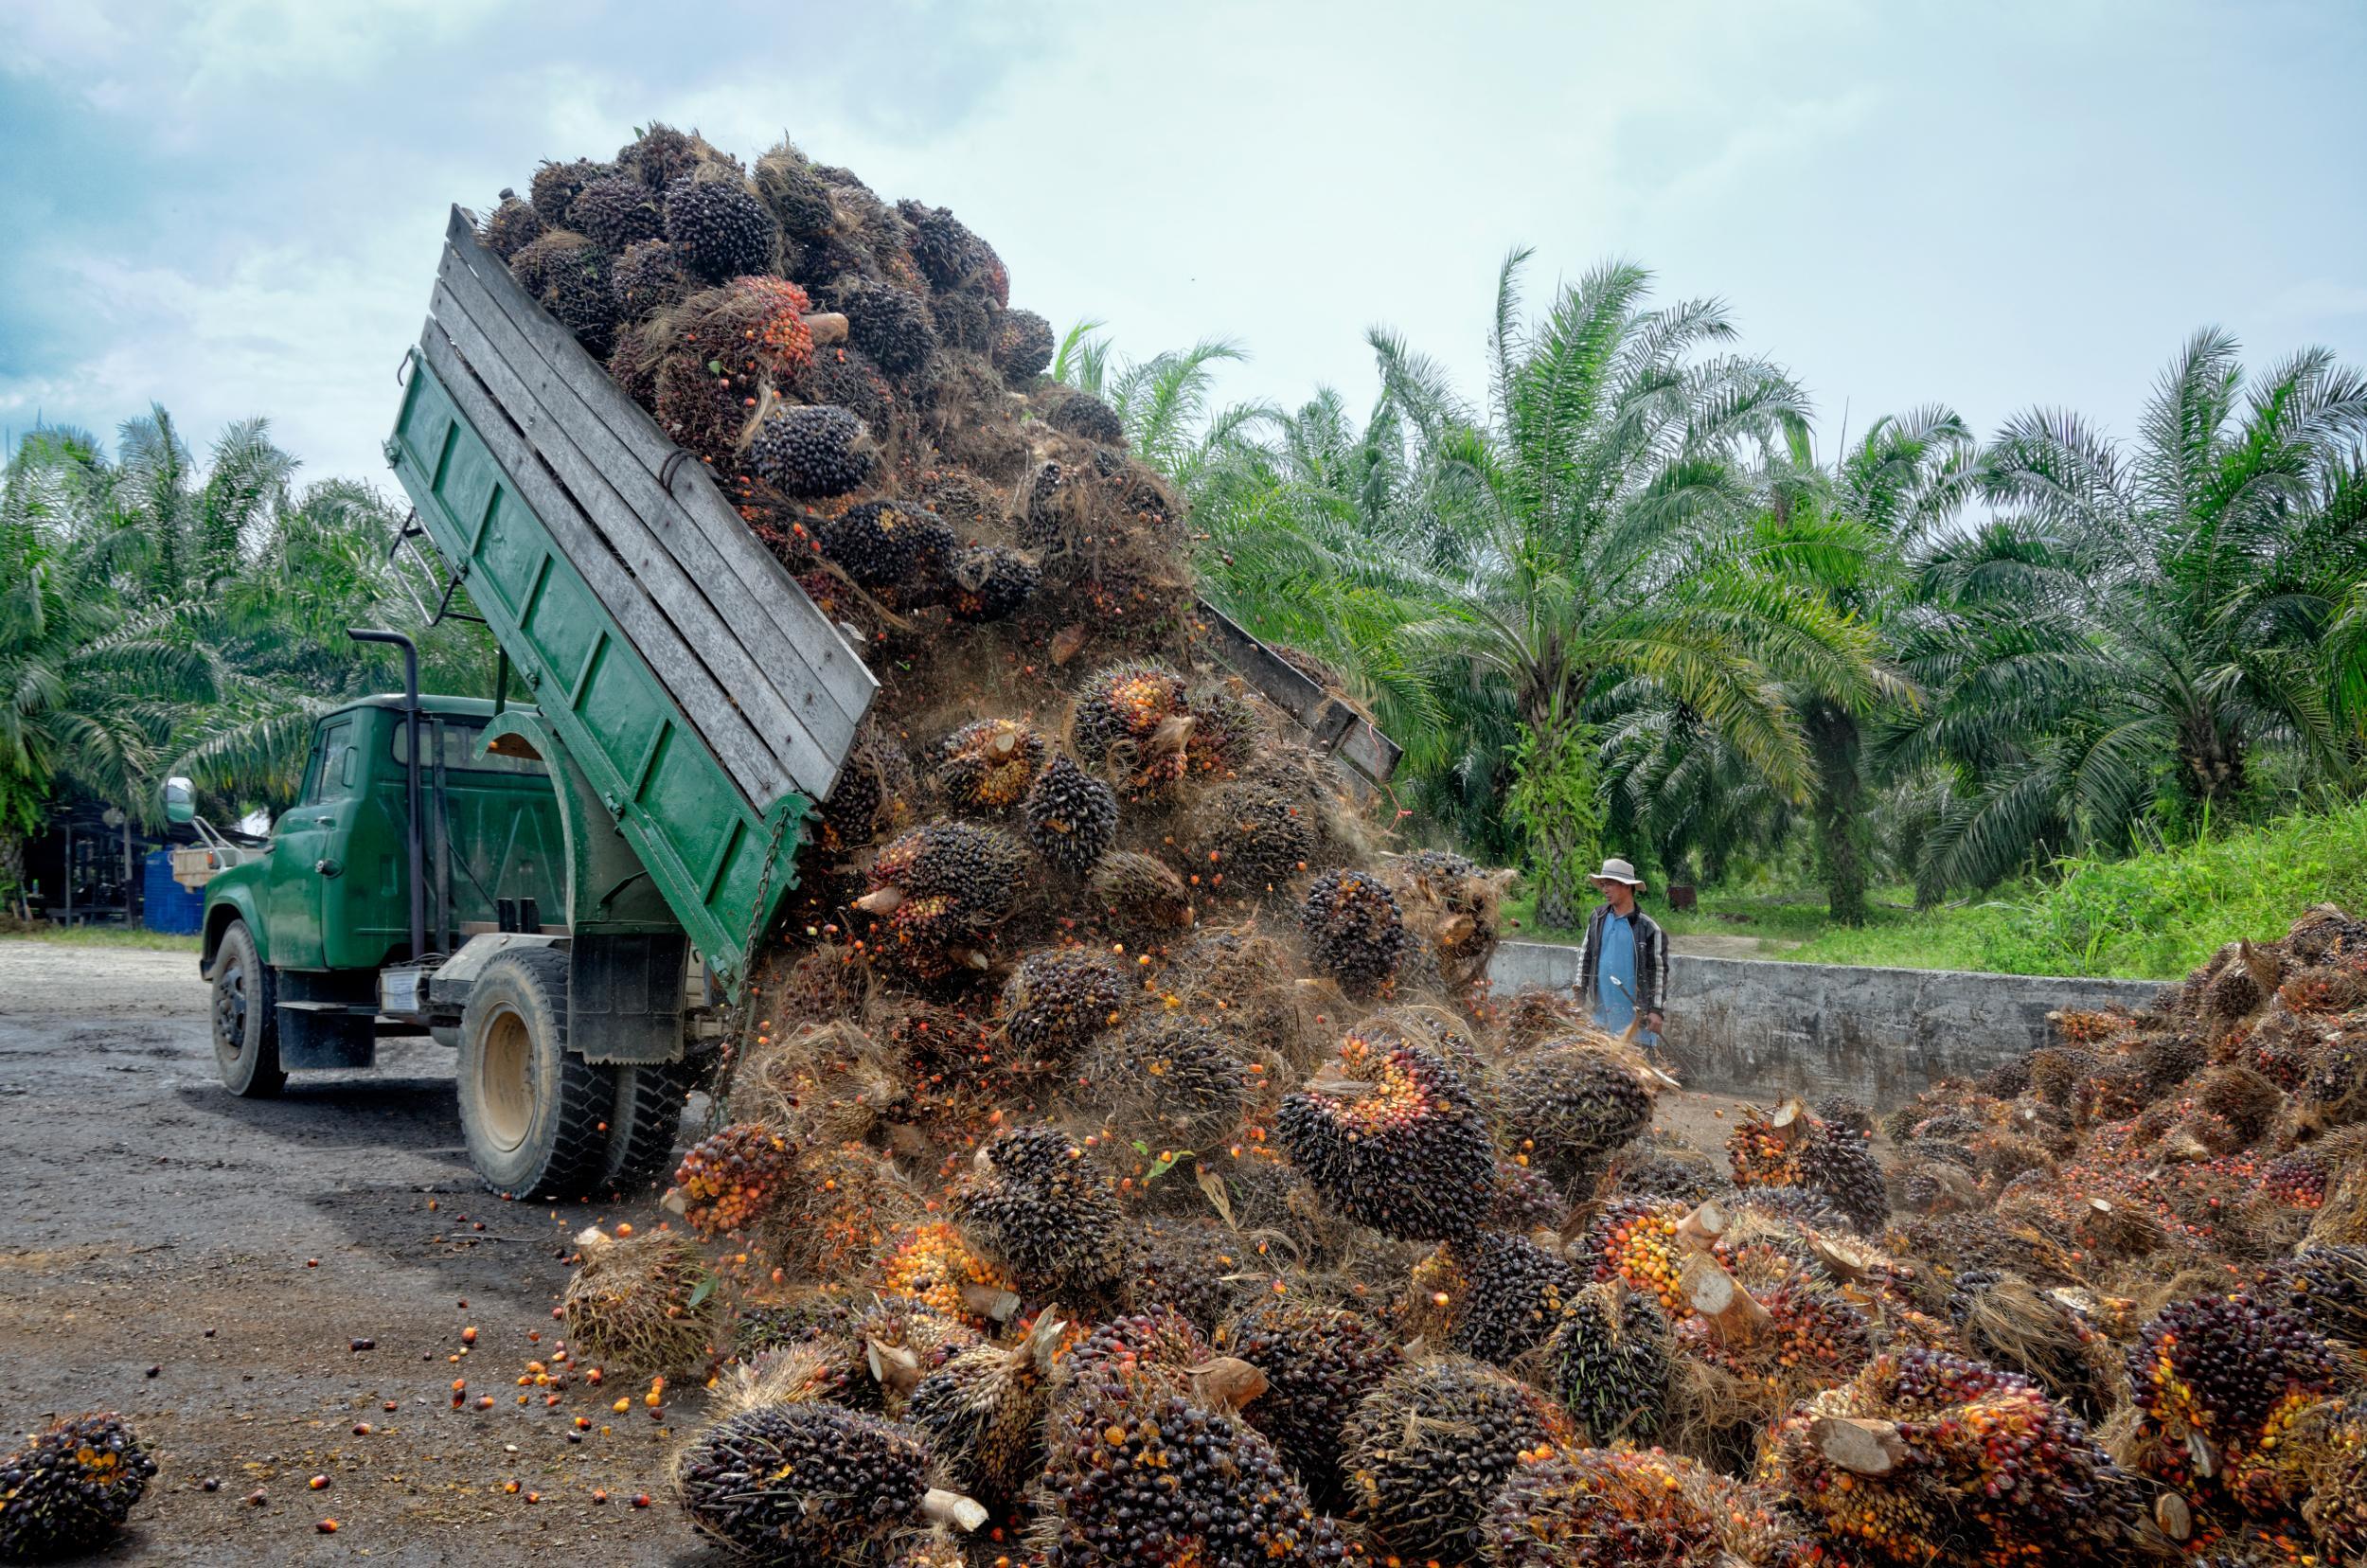 Unsaturated fat means less harmful palm oil production